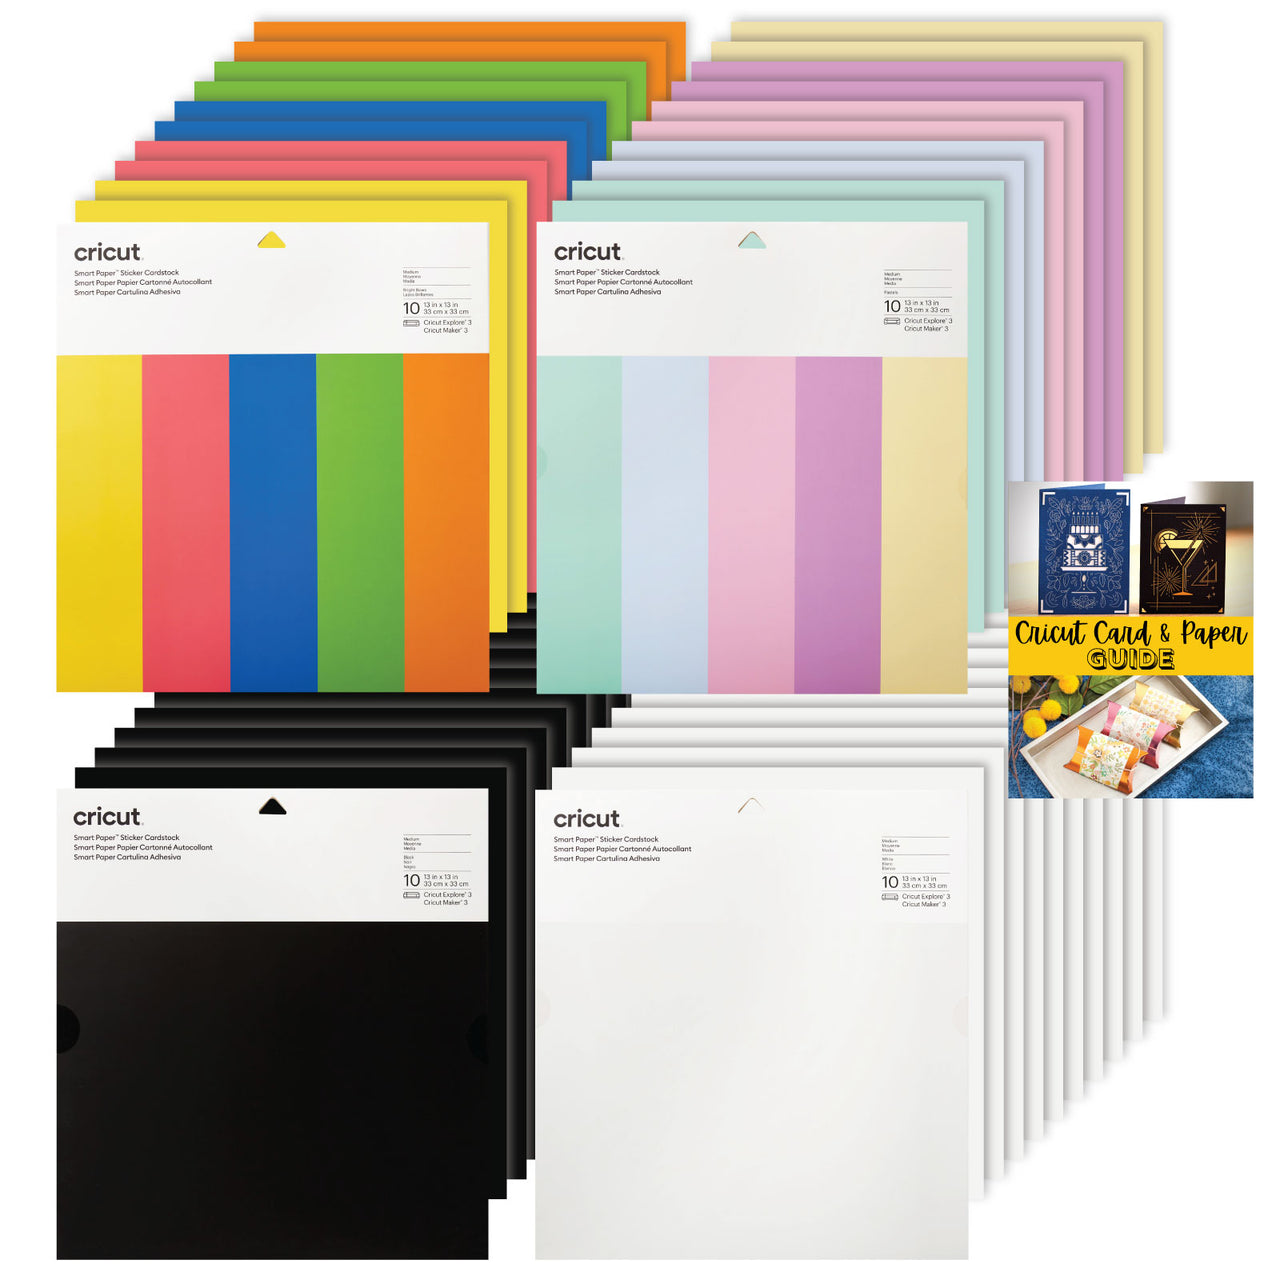 Cricut Smart Paper Sticker Cardstock Black, White, Bright Bow, and Pastels Bundle 10 Sheets - 13in x 13in - Adhesive Paper for Stickers